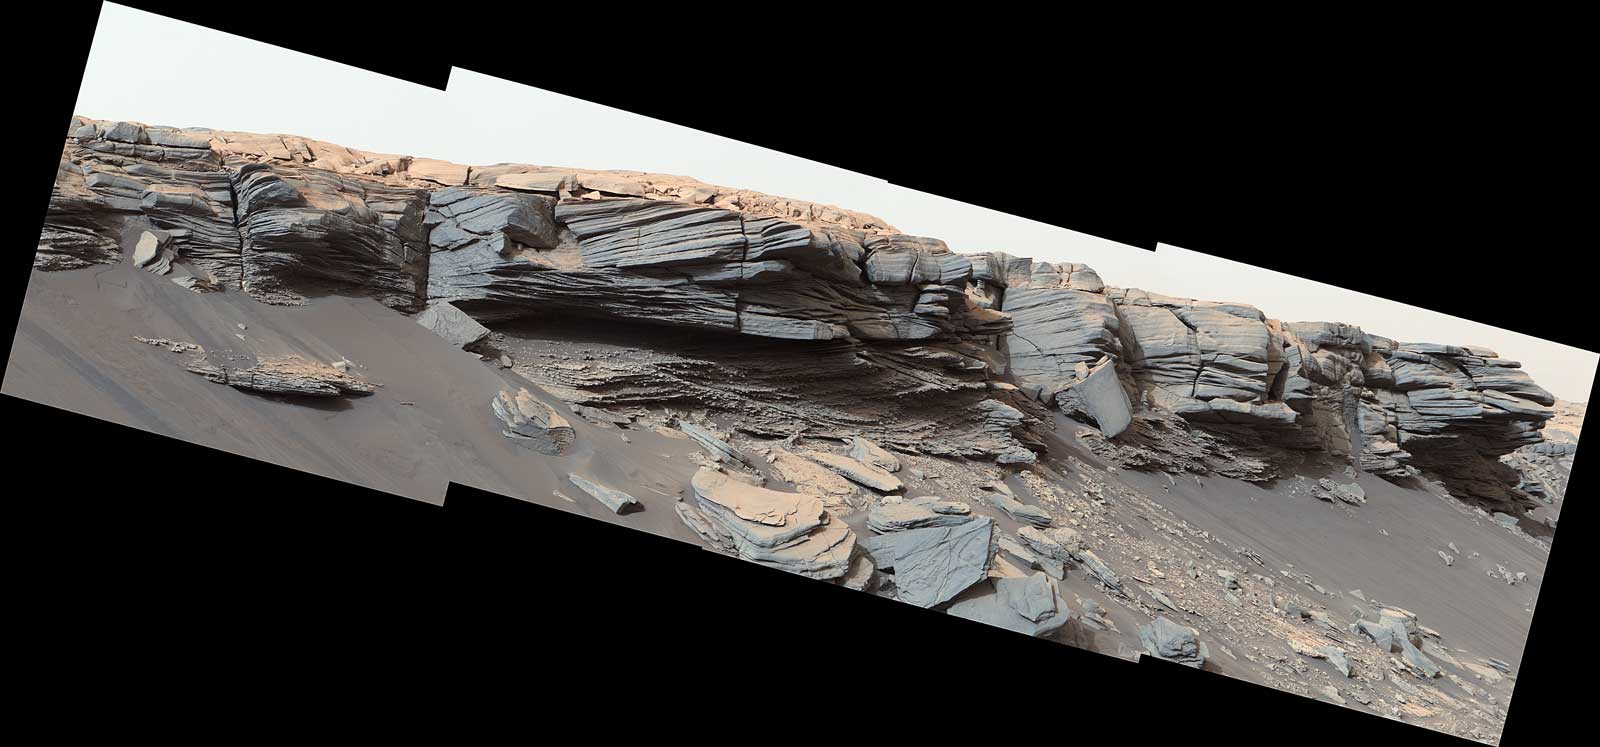 The goosebump-like features in the center of this image were formed by water billions of years ago. NASA's Curiosity Mars rover discovered them as it crested the slope of "Greenheugh Pediment" on Feb. 24, 2020, the 2685th Martian day, or sol, of the mission.